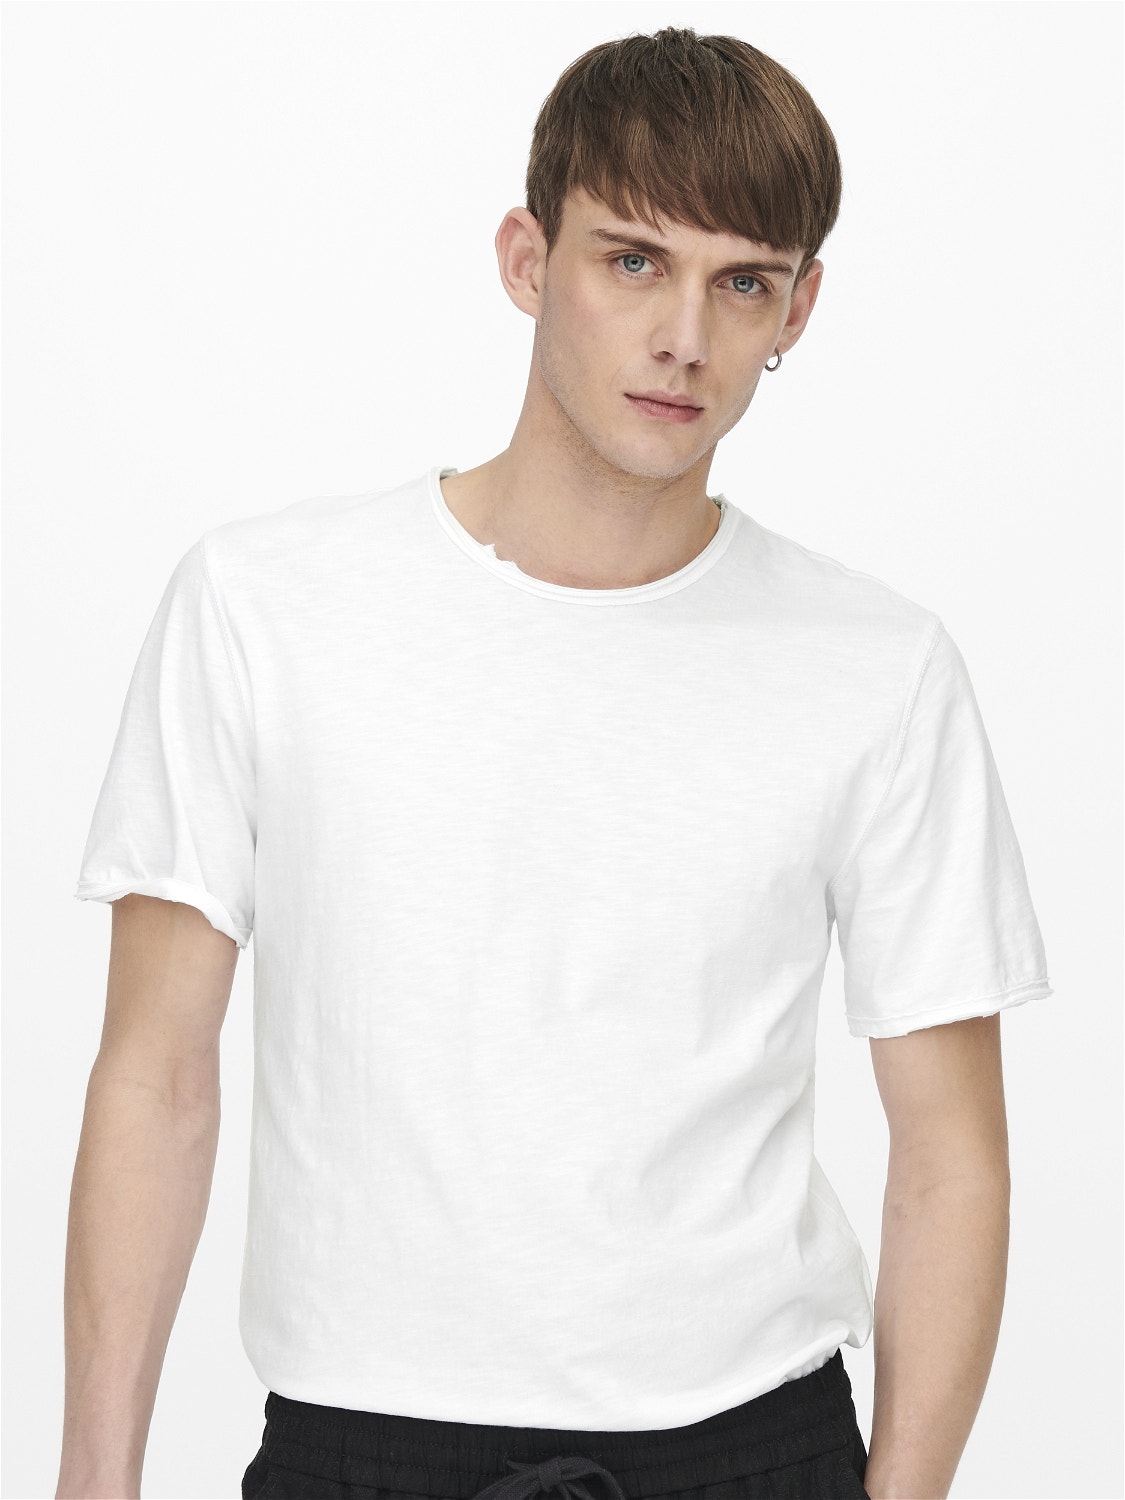 ONLY & SONS Long line fit O-hals T-shirts -Bright White - 22017822